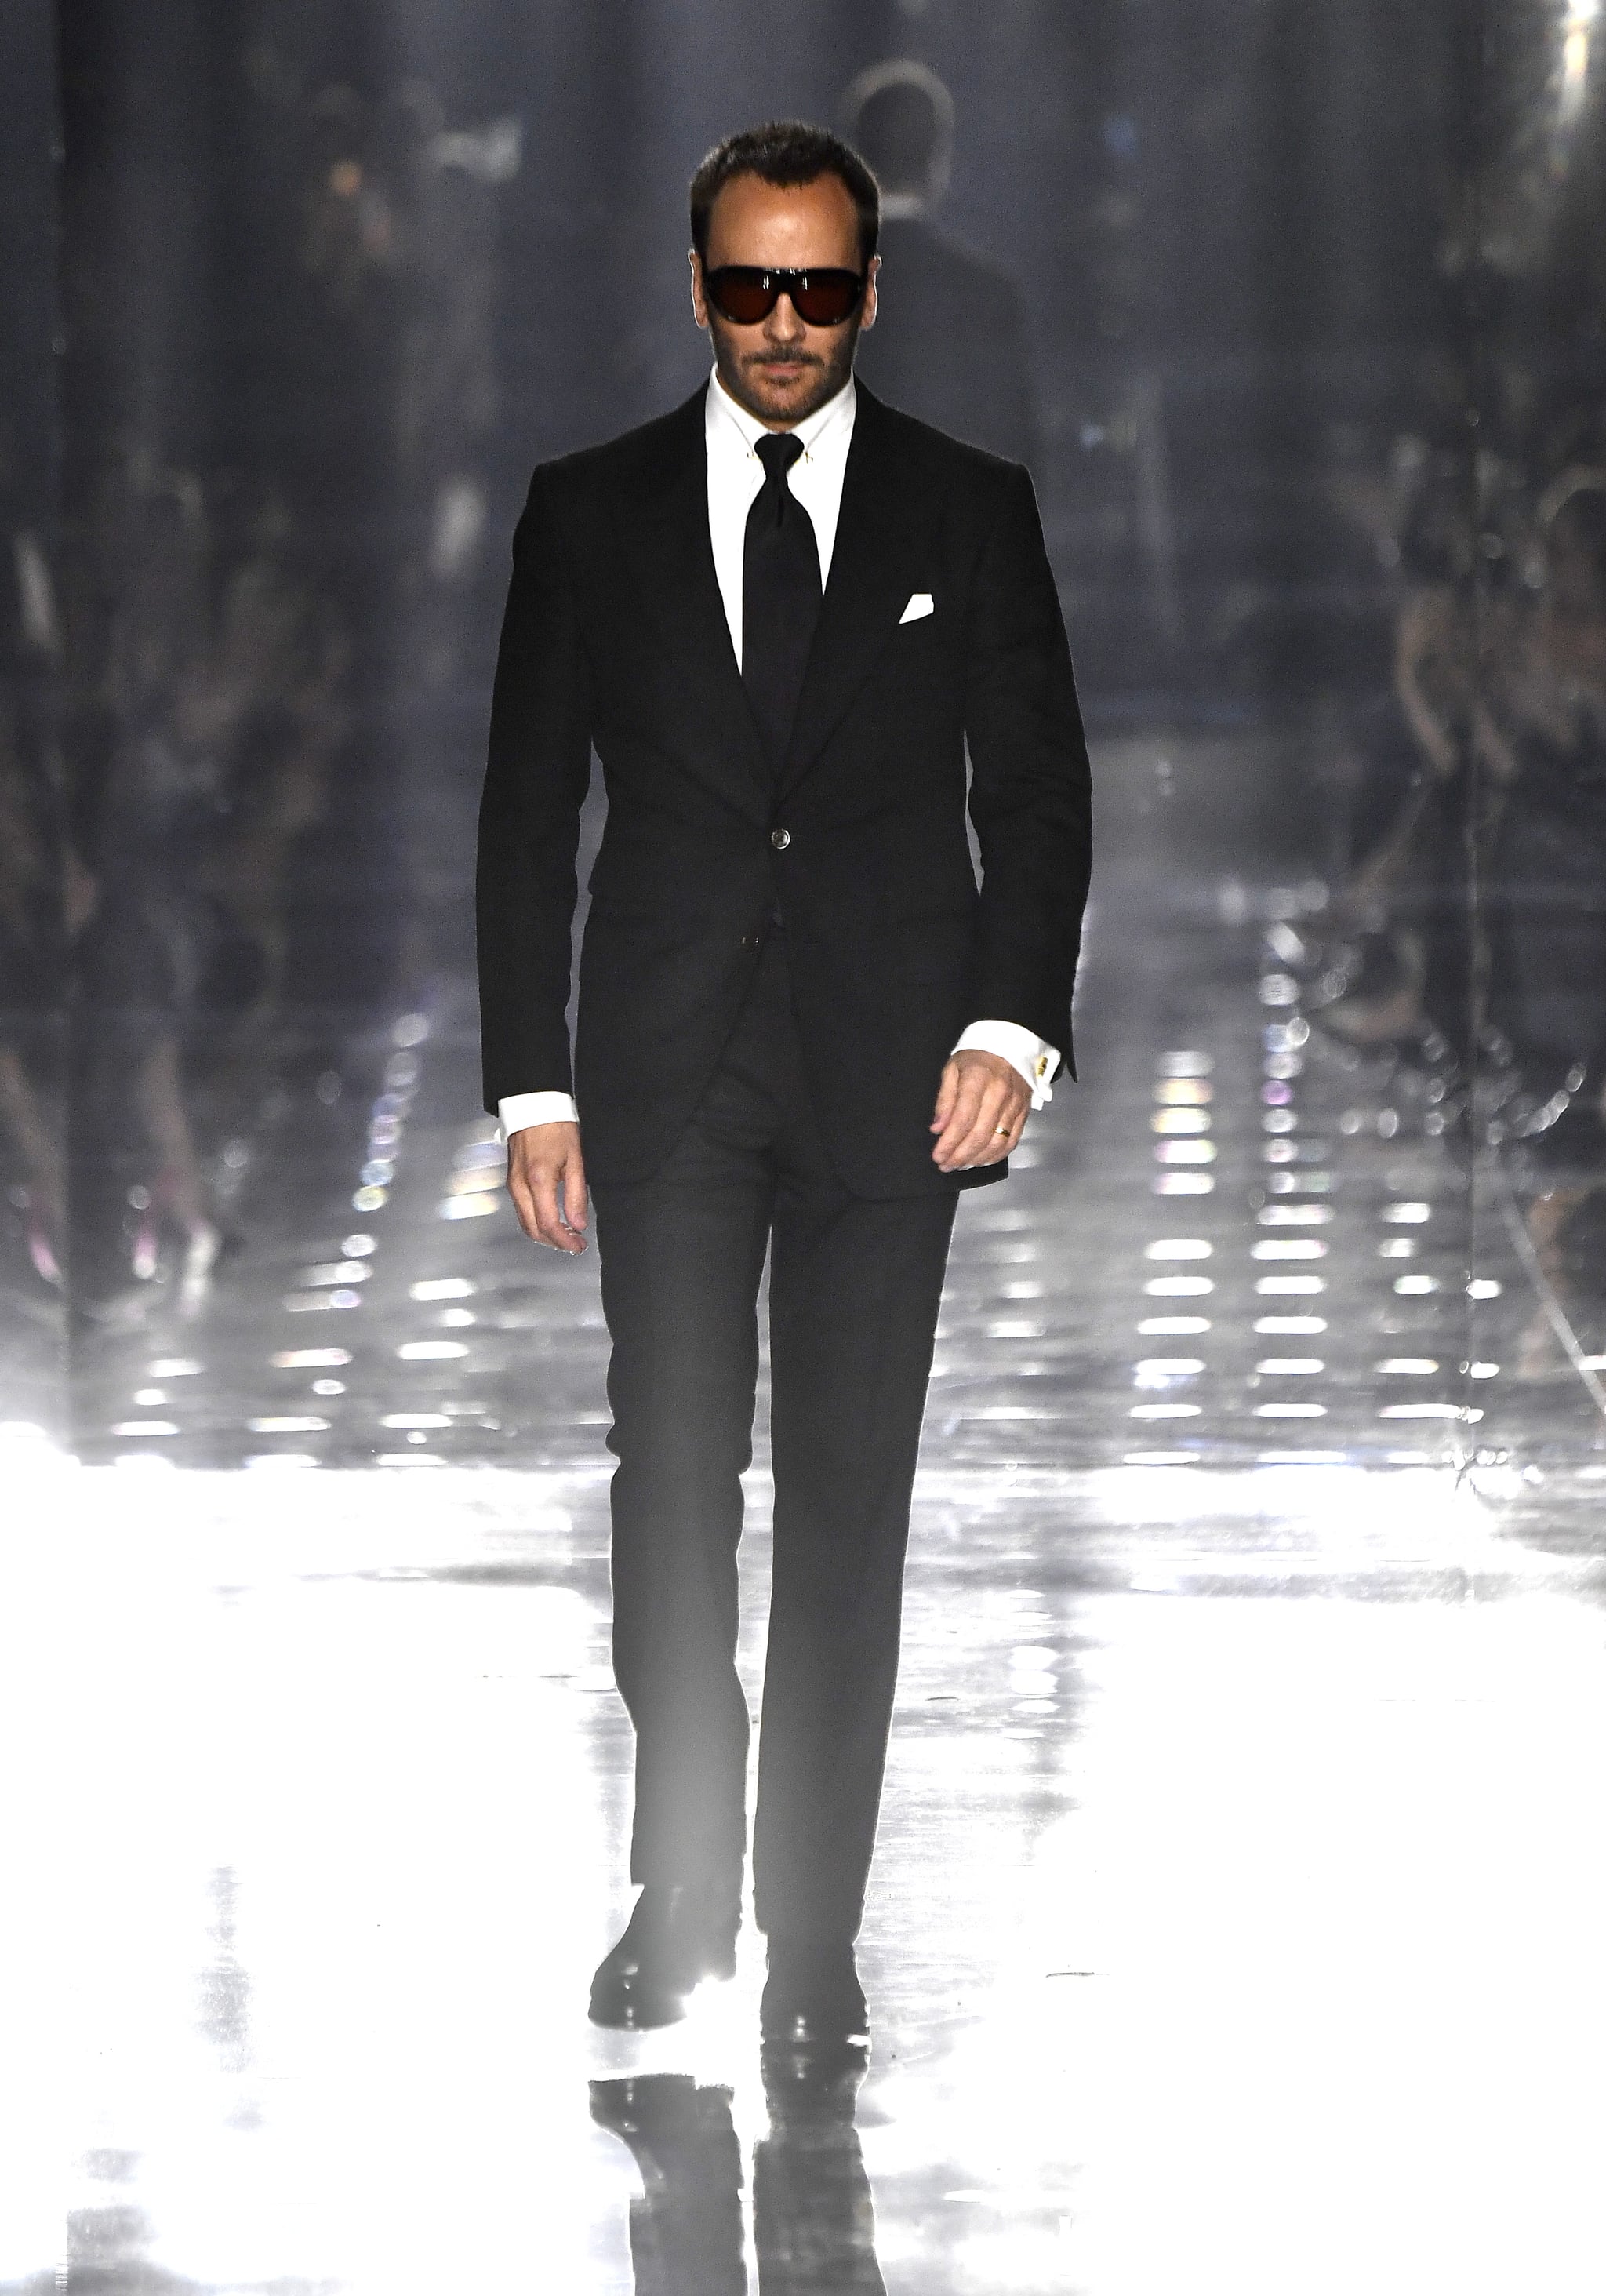 Bakterie Adgang parade Tom Ford's Fall 2020 Runway | The Red Carpet! The Runway! Tom Ford's  Fashion Show Was an Ode to Hollywood Glamour | POPSUGAR Fashion Photo 50